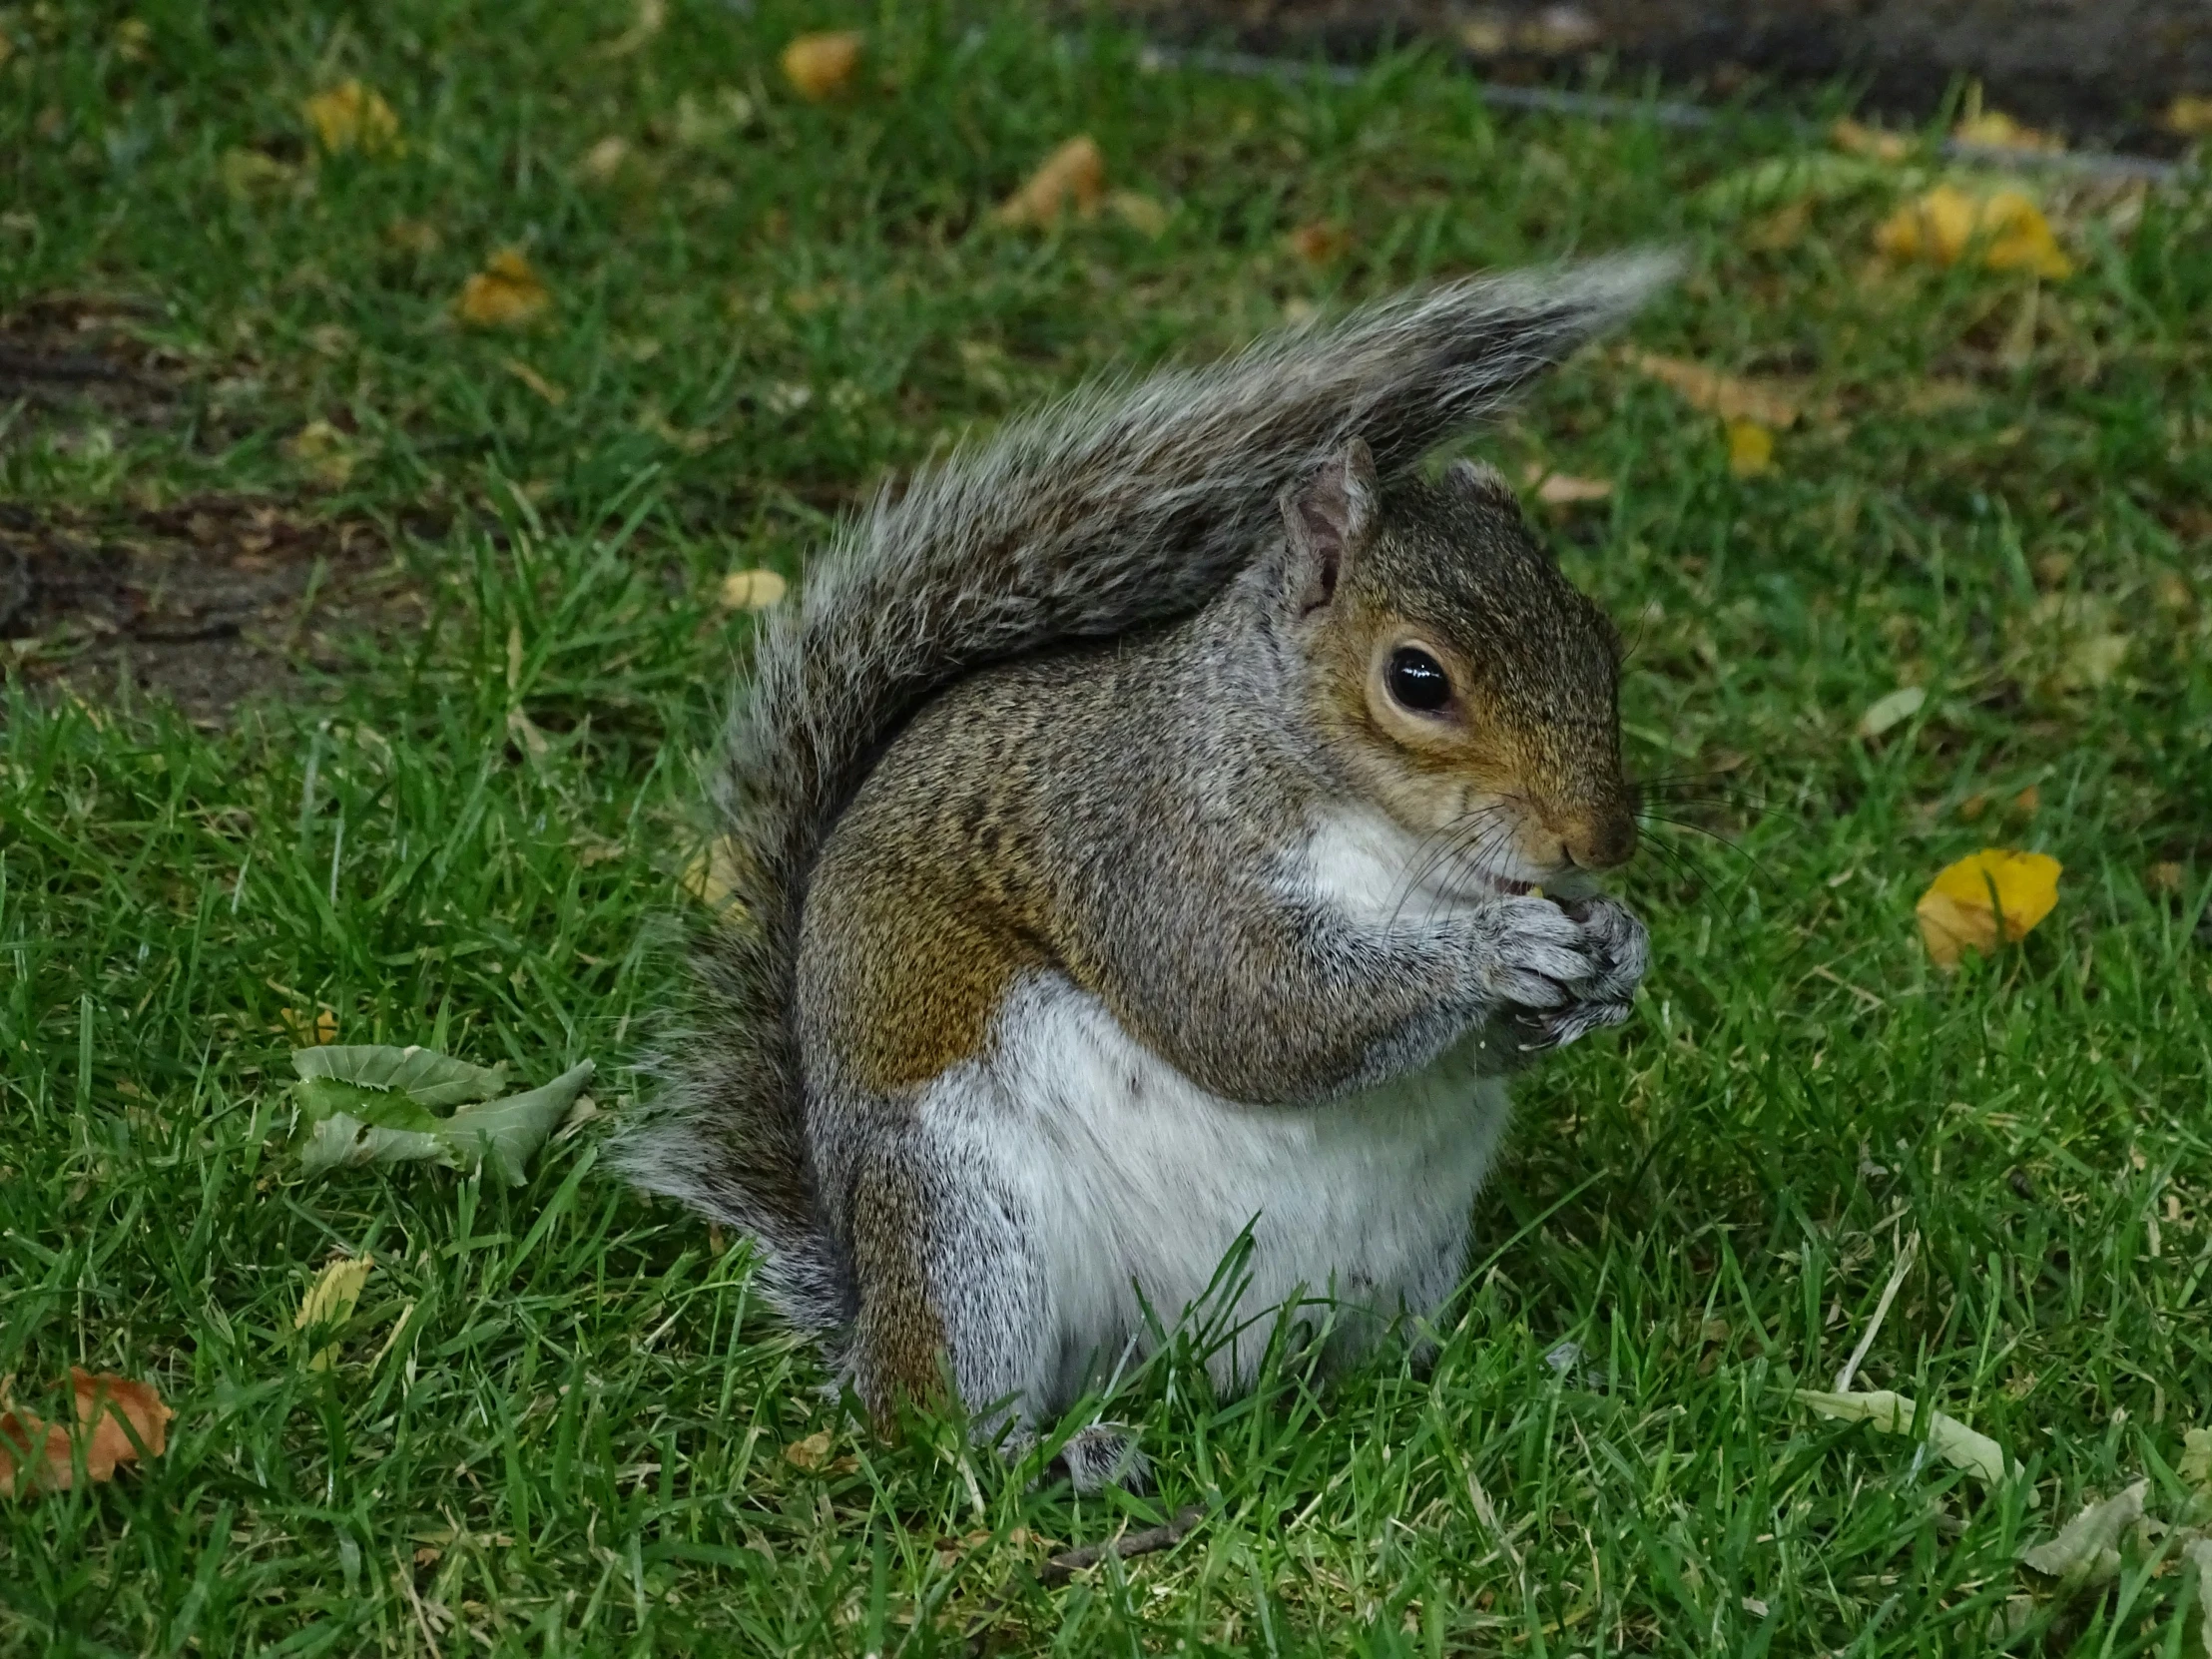 a grey squirrel sitting in the grass eating soing